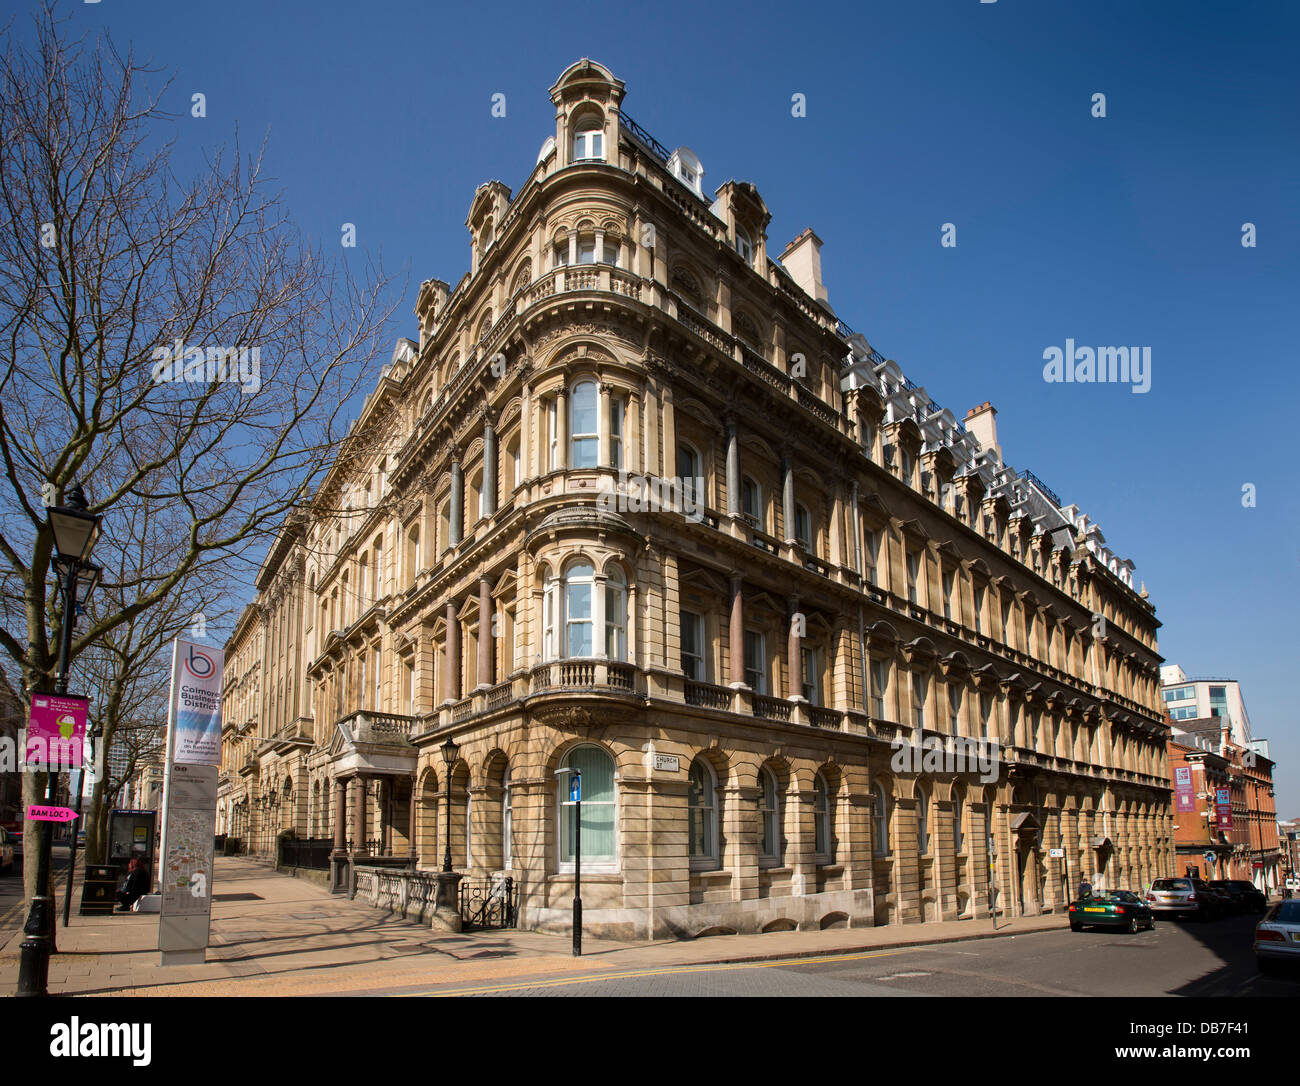 UK, England, Birmingham, Colmore Row, Colmore Business District Stock